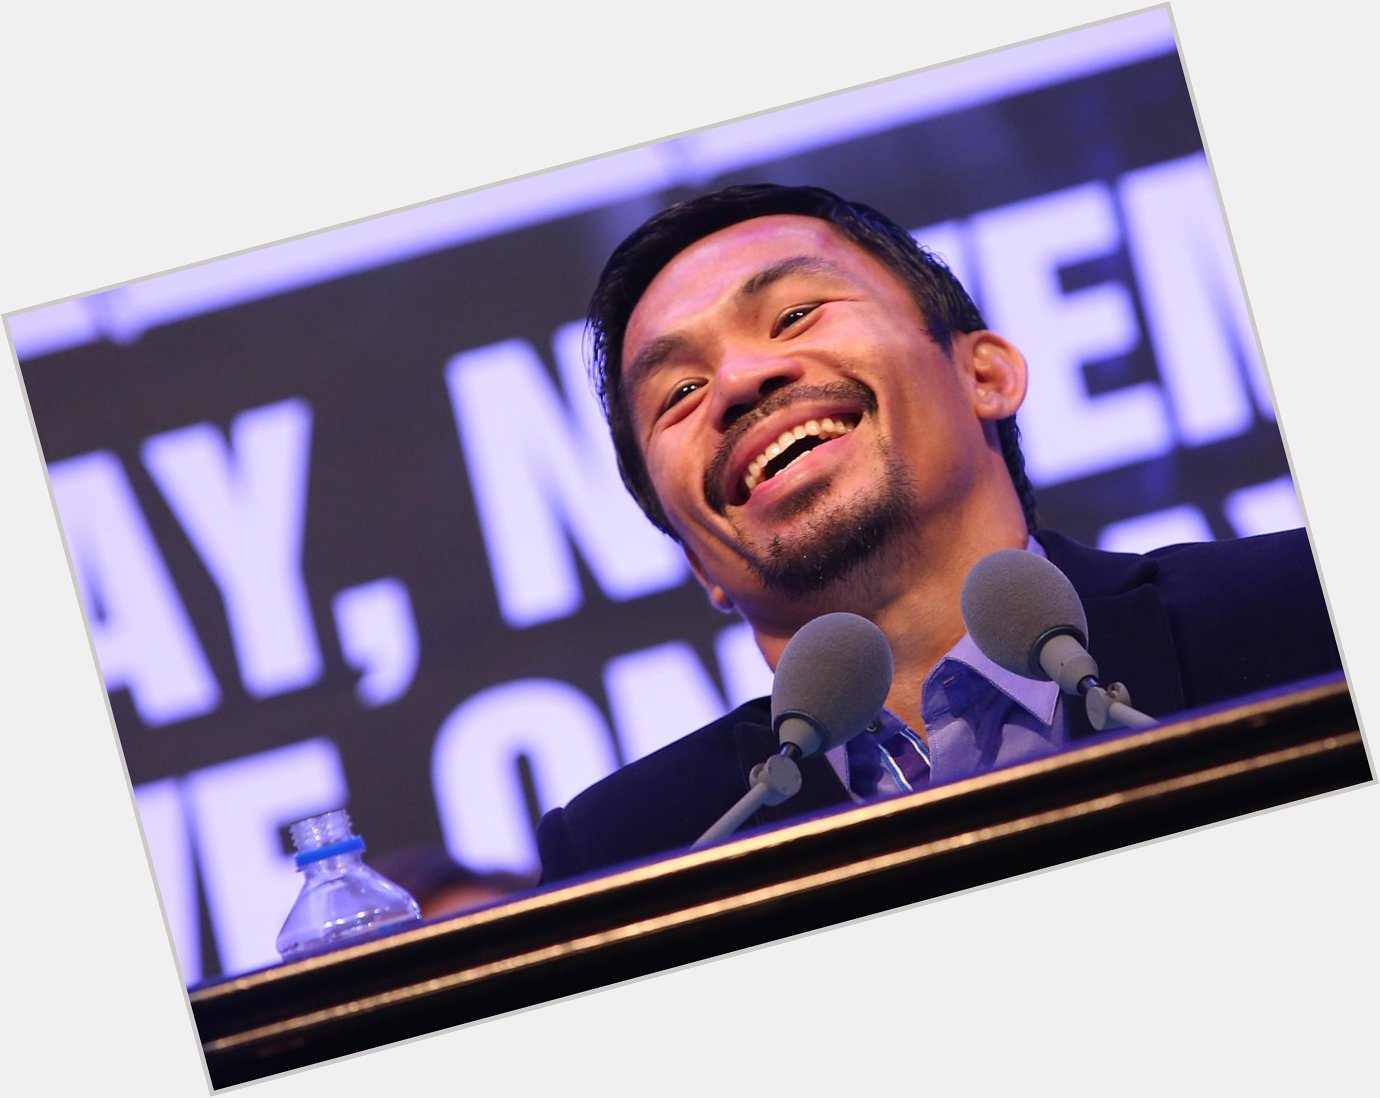 Happy 36th birthday to Manny Pacquiao. Will he fight Floyd Mayweather before his next birthday? 